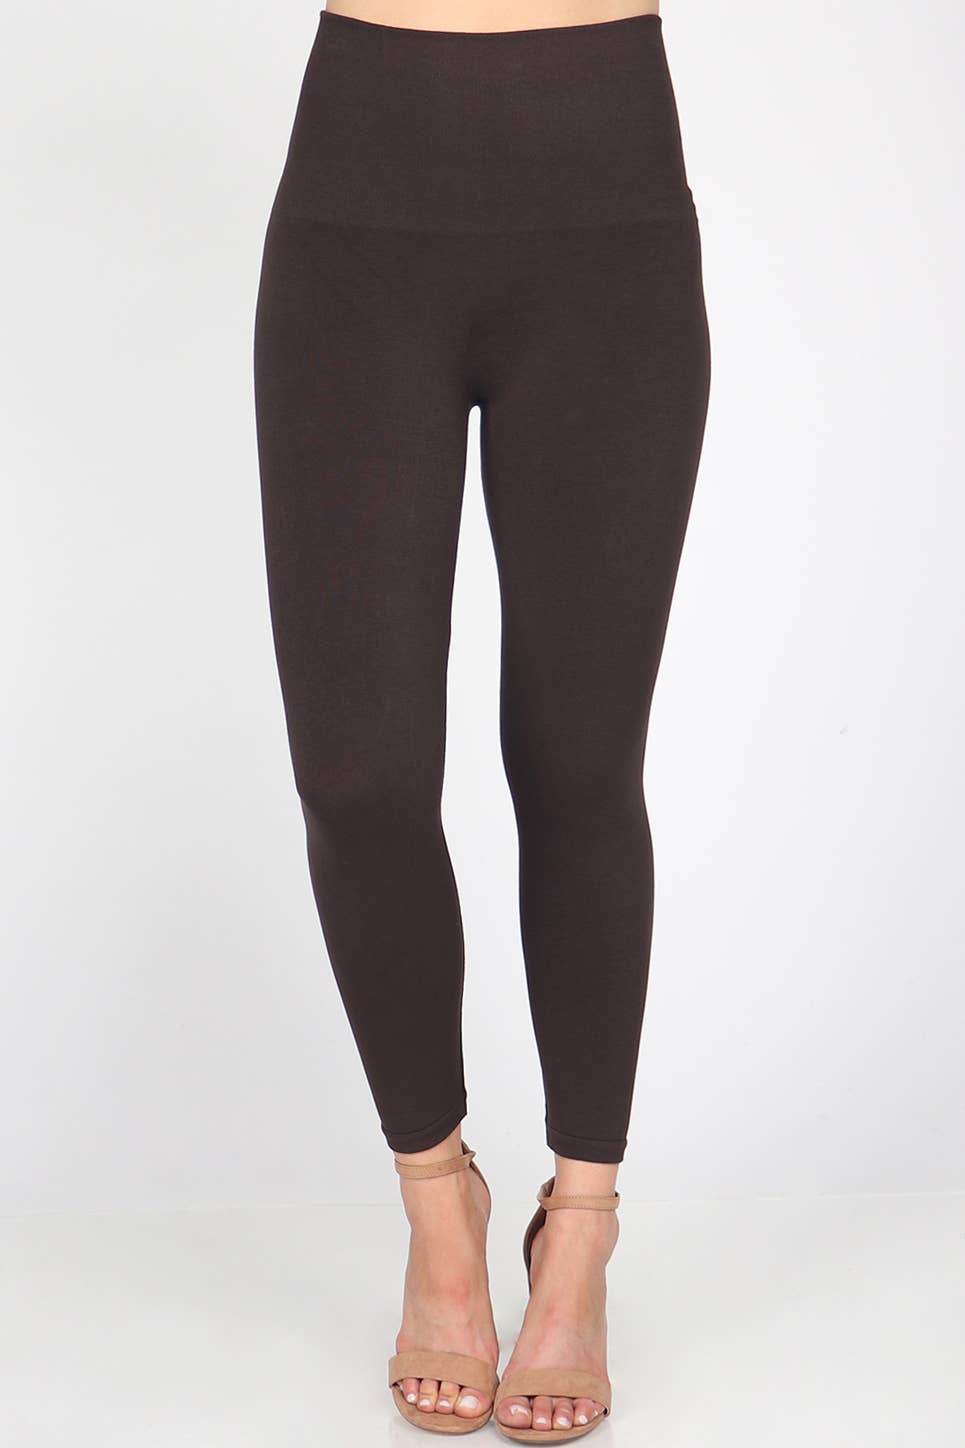 Our Favorite Leggings - Cropped